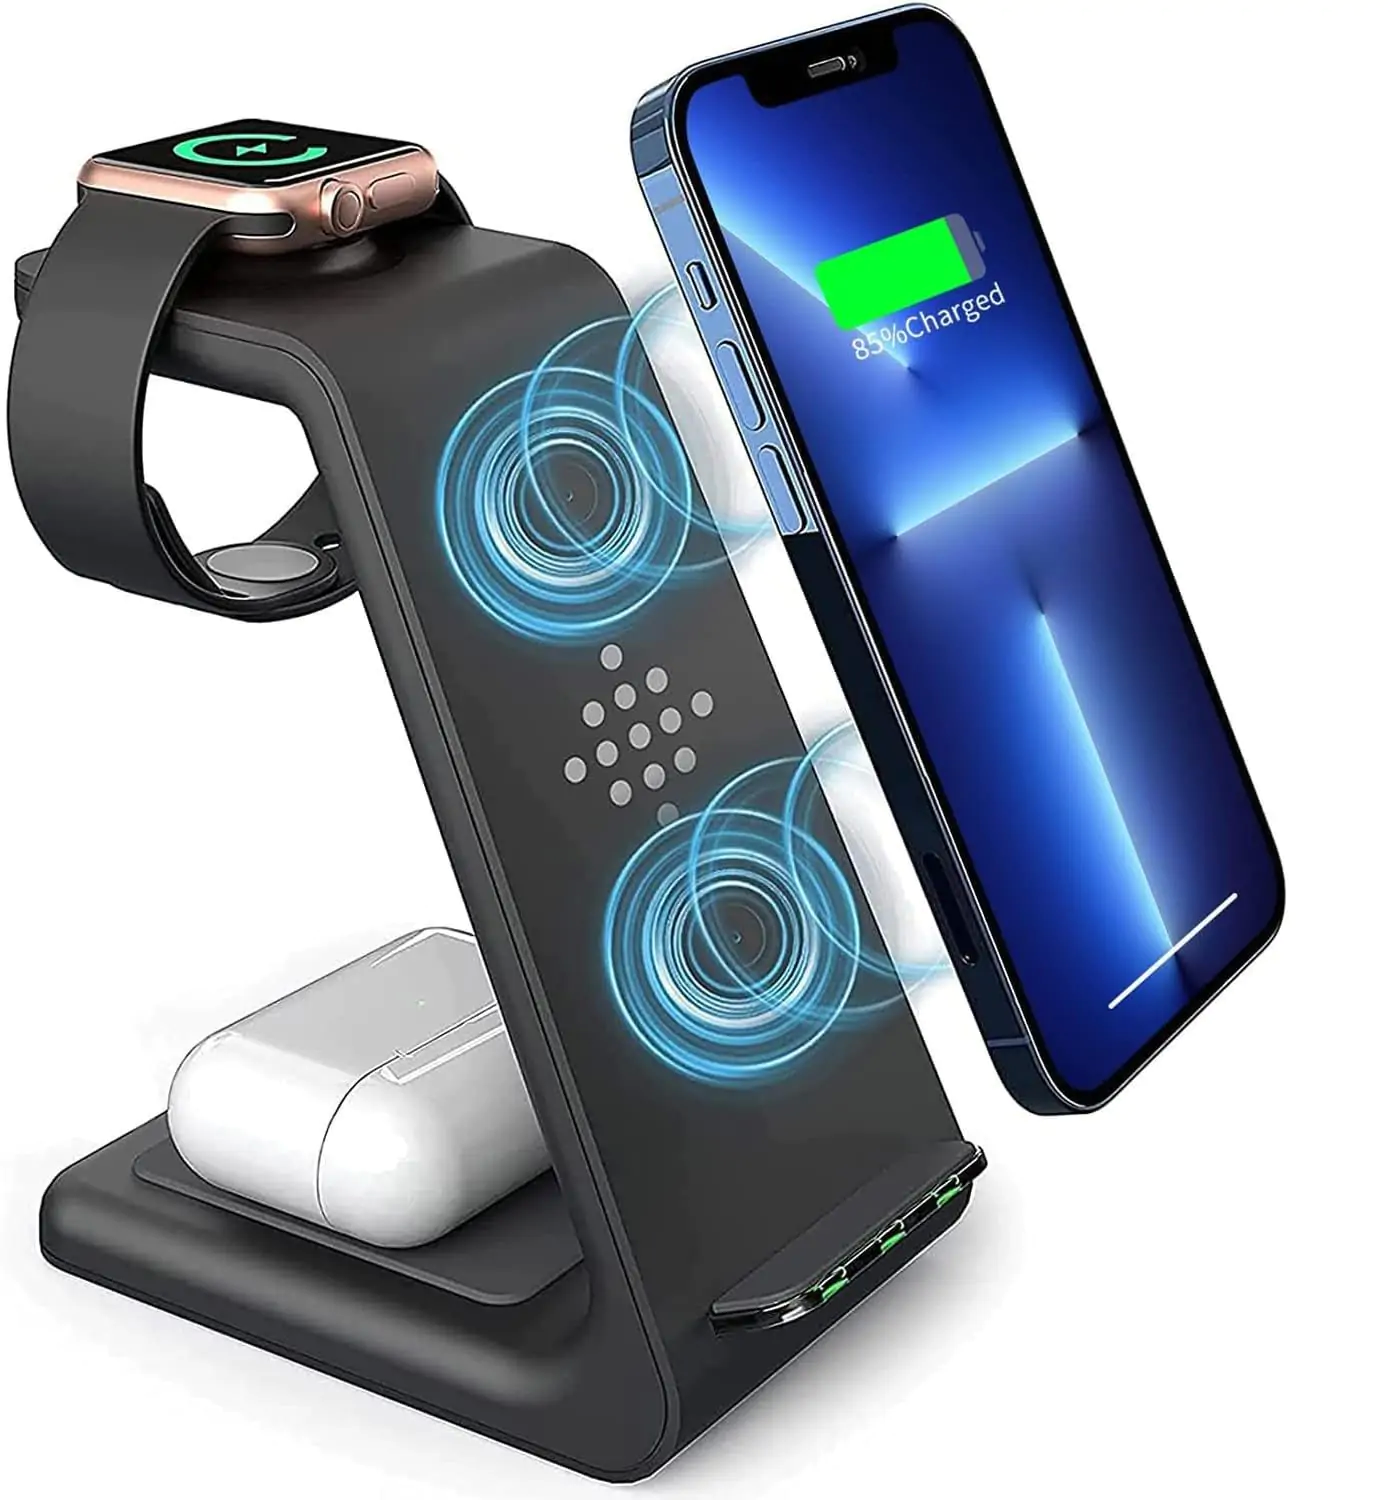 Wireless Charger 3 in 1 Wireless Charging Station Fast Desk Charging Station for Samsung iPhone AirPods TWS ipad iWatch etc Wireless Charger Stand